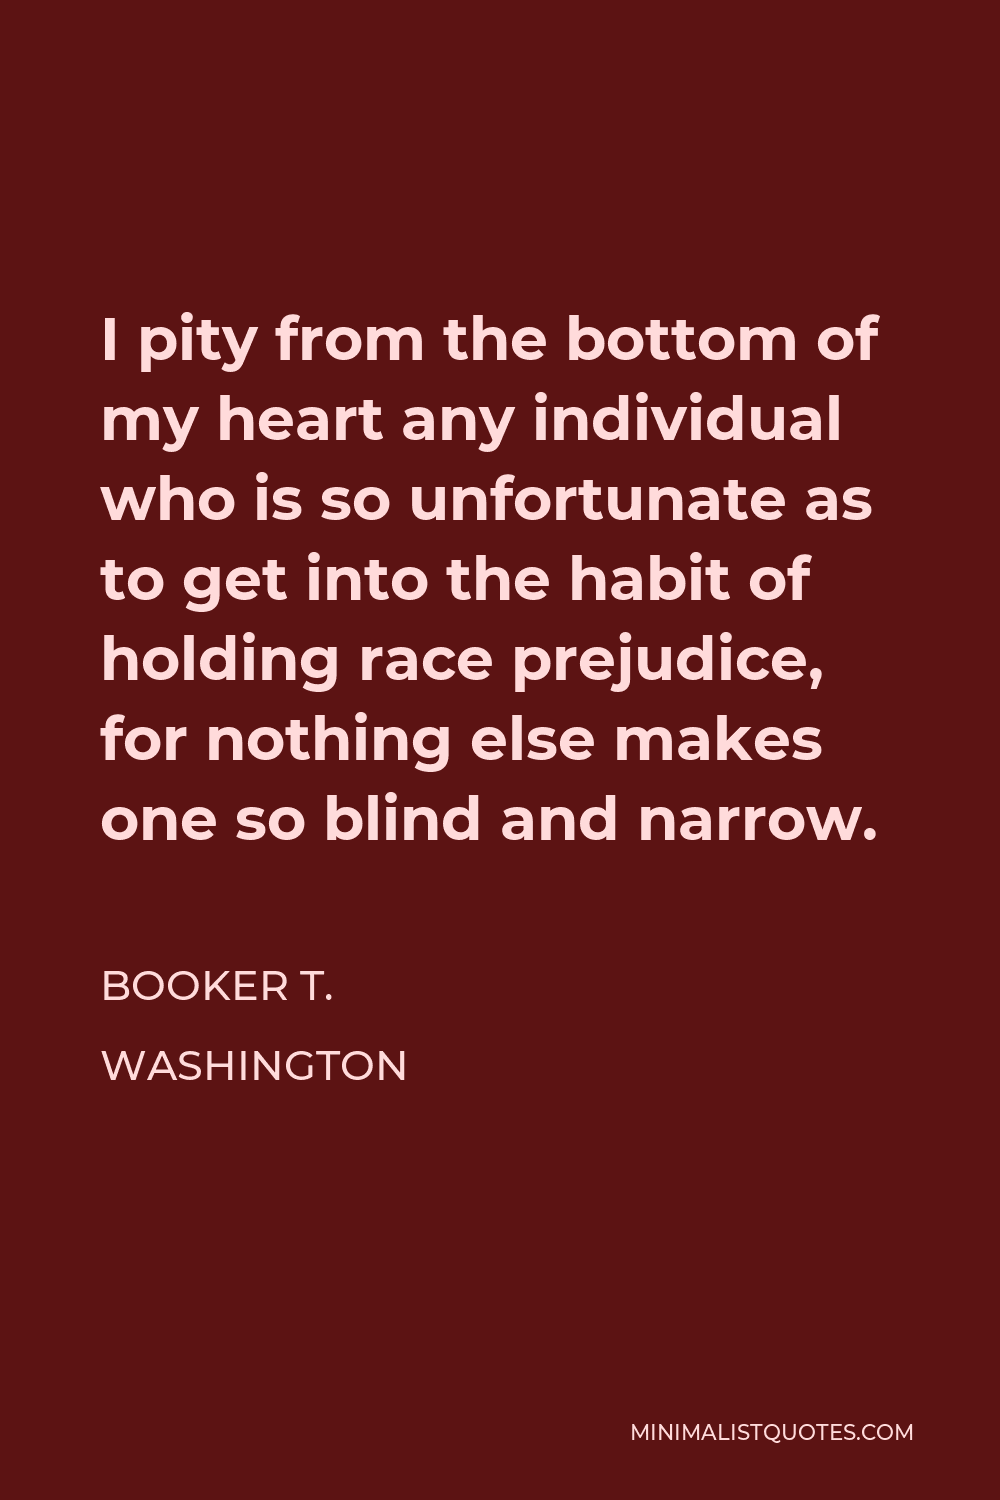 Booker T. Washington Quote - I pity from the bottom of my heart any individual who is so unfortunate as to get into the habit of holding race prejudice, for nothing else makes one so blind and narrow.